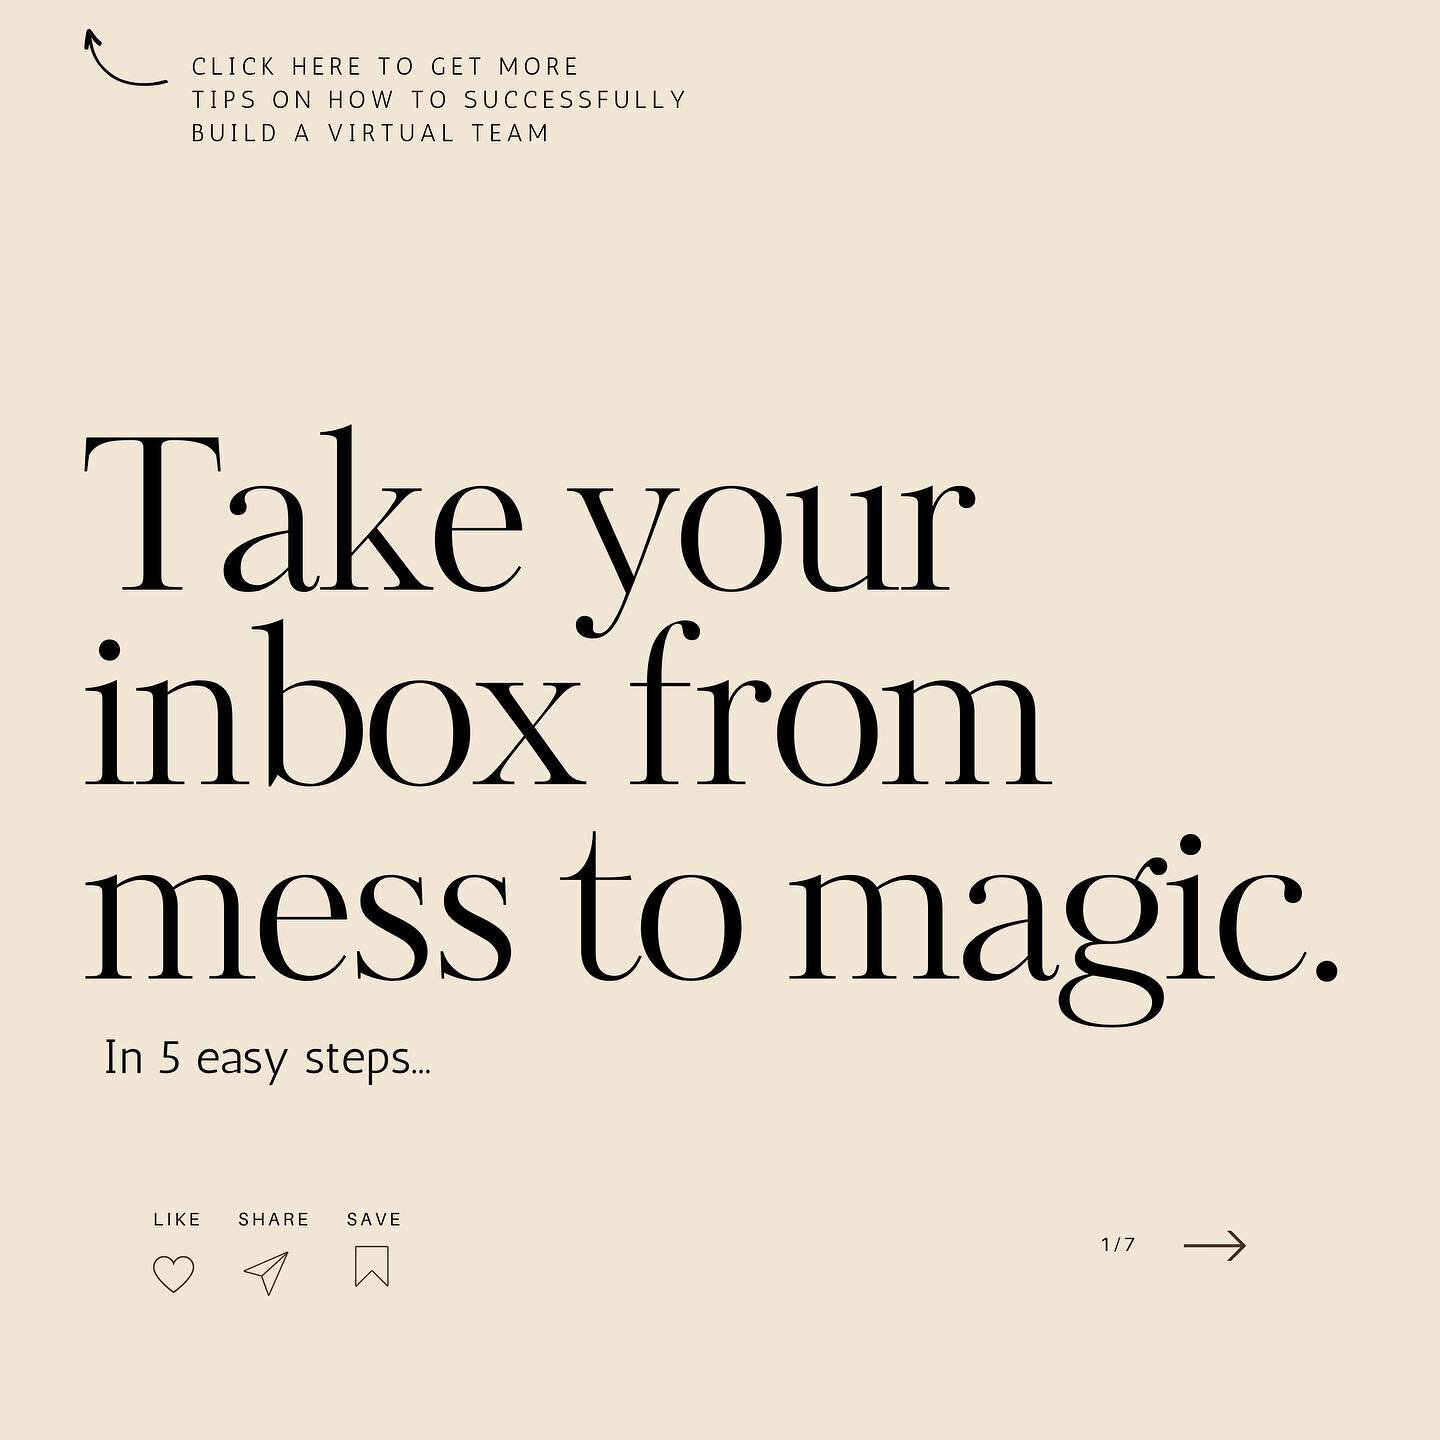 Take your inbox from mess to magic in 5 easy steps 🪄

1️⃣ Start fresh.

The first step is to move all emails that are three months or older into a folder called:&nbsp;Old emails (add month + year).

Pro Tip: You can move emails in bulk to make this 